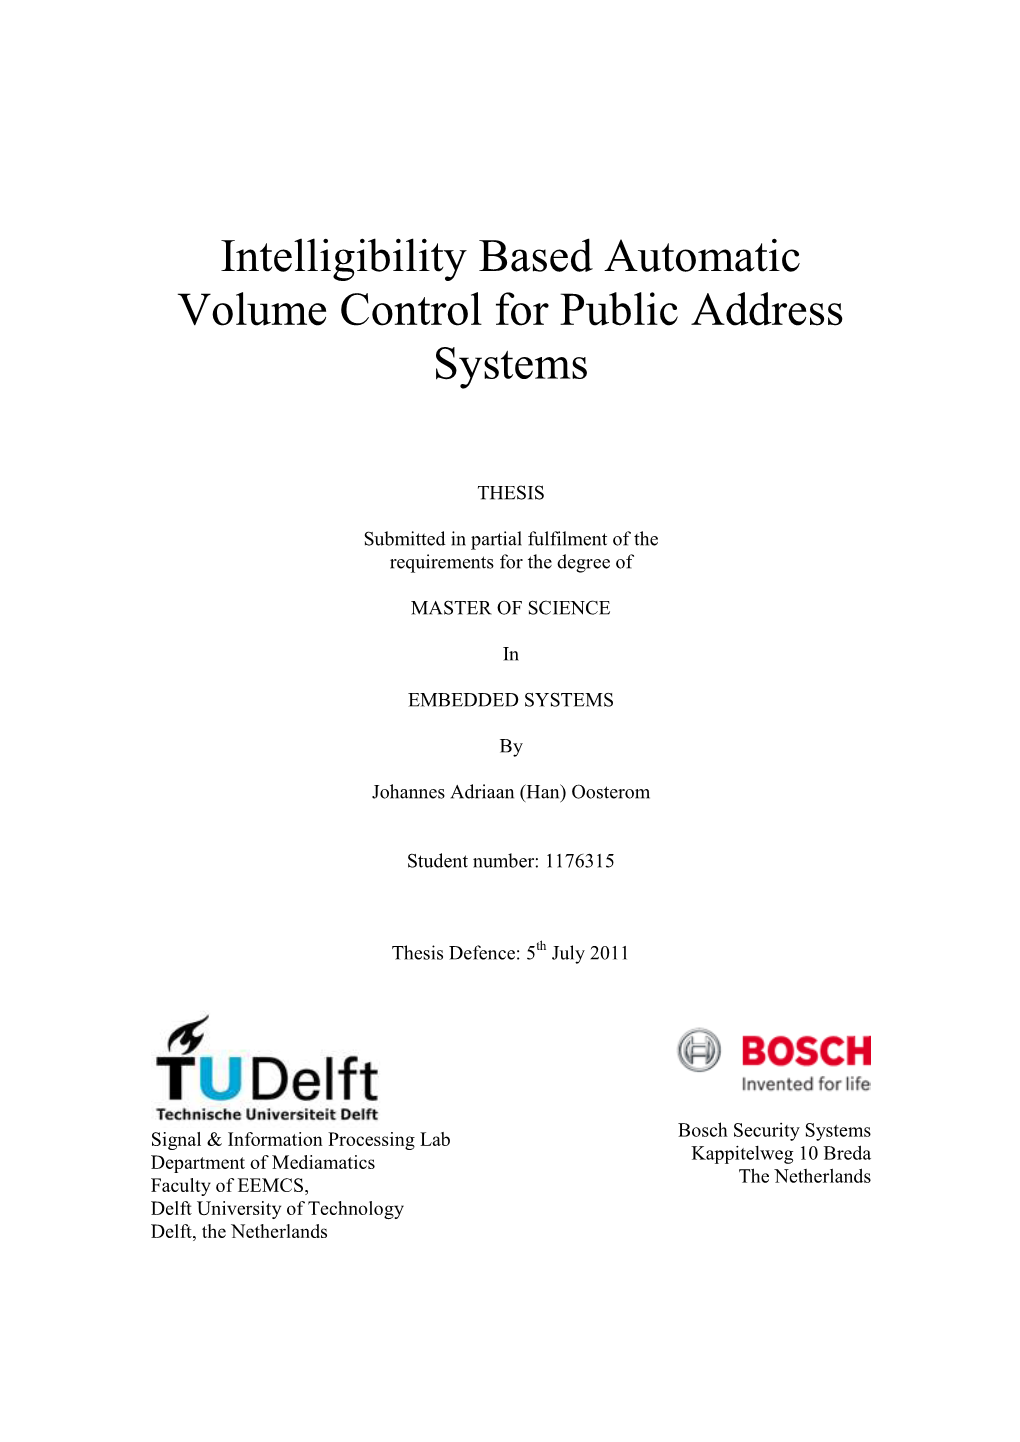 Intelligibility Based Automatic Volume Control for Public Address Systems